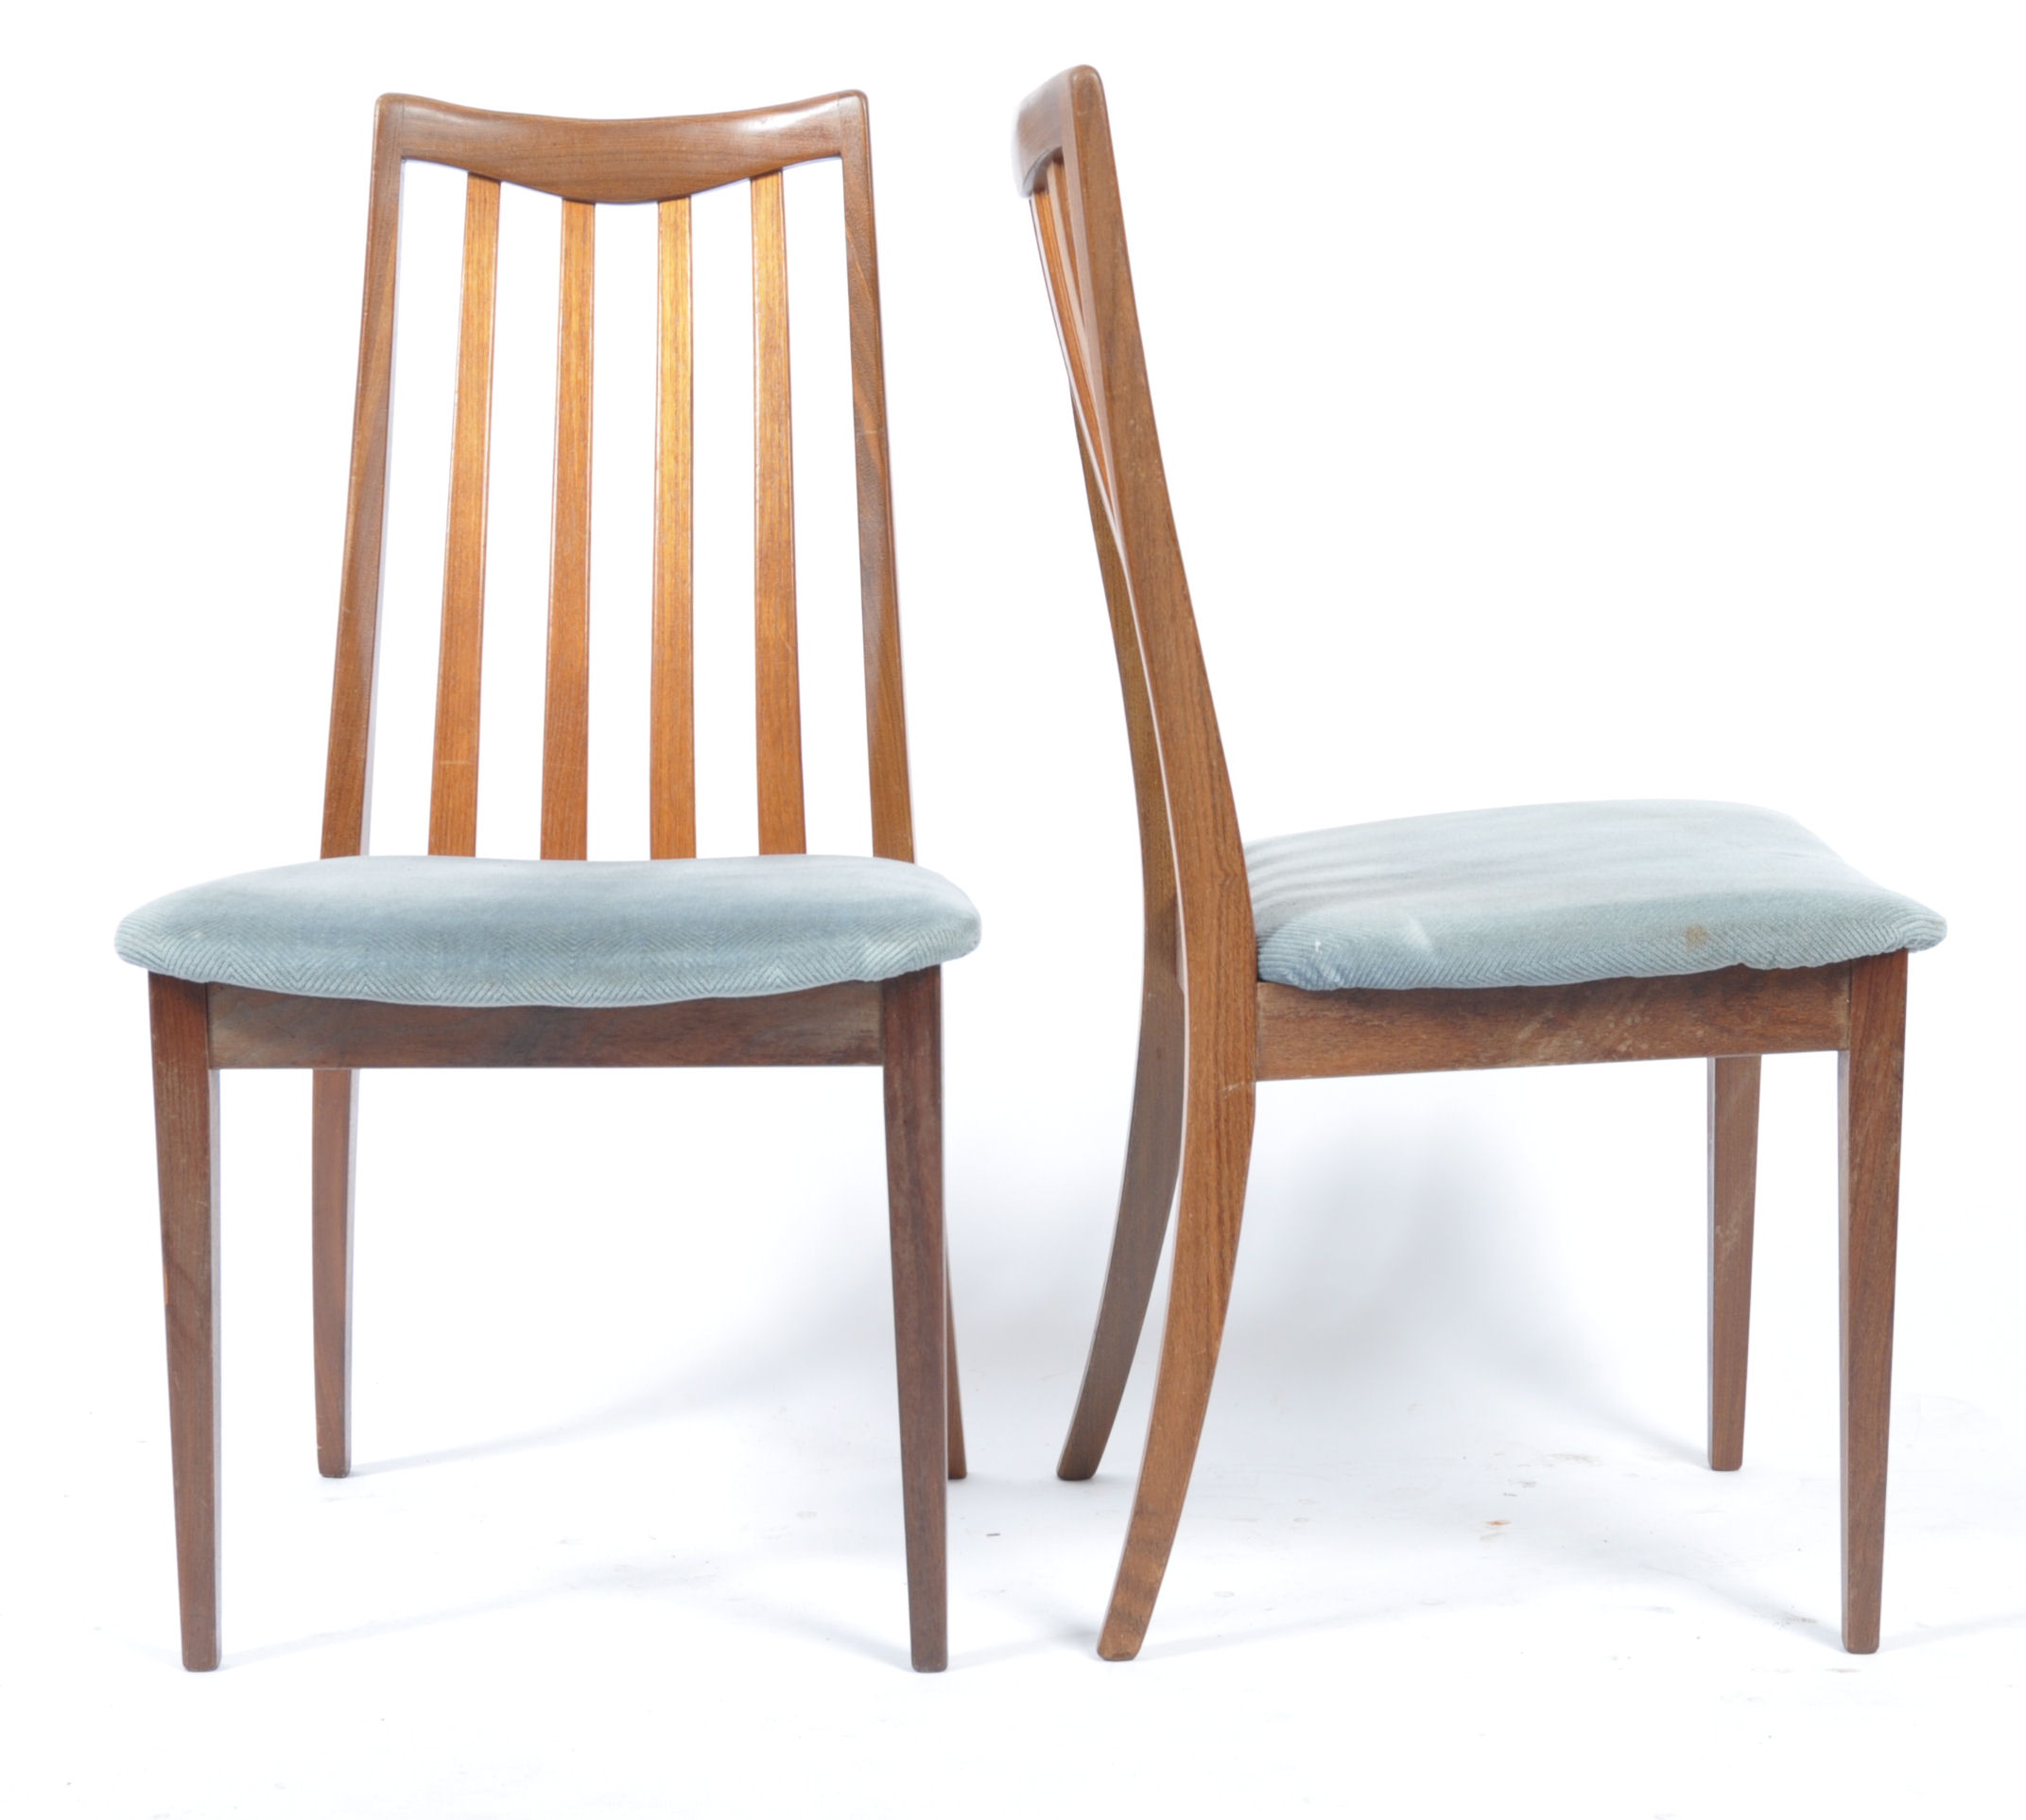 LESLIE DANDY FOR G-PLAN SET OF 4 TEAK WOOD DINING CHAIRS - Image 4 of 5